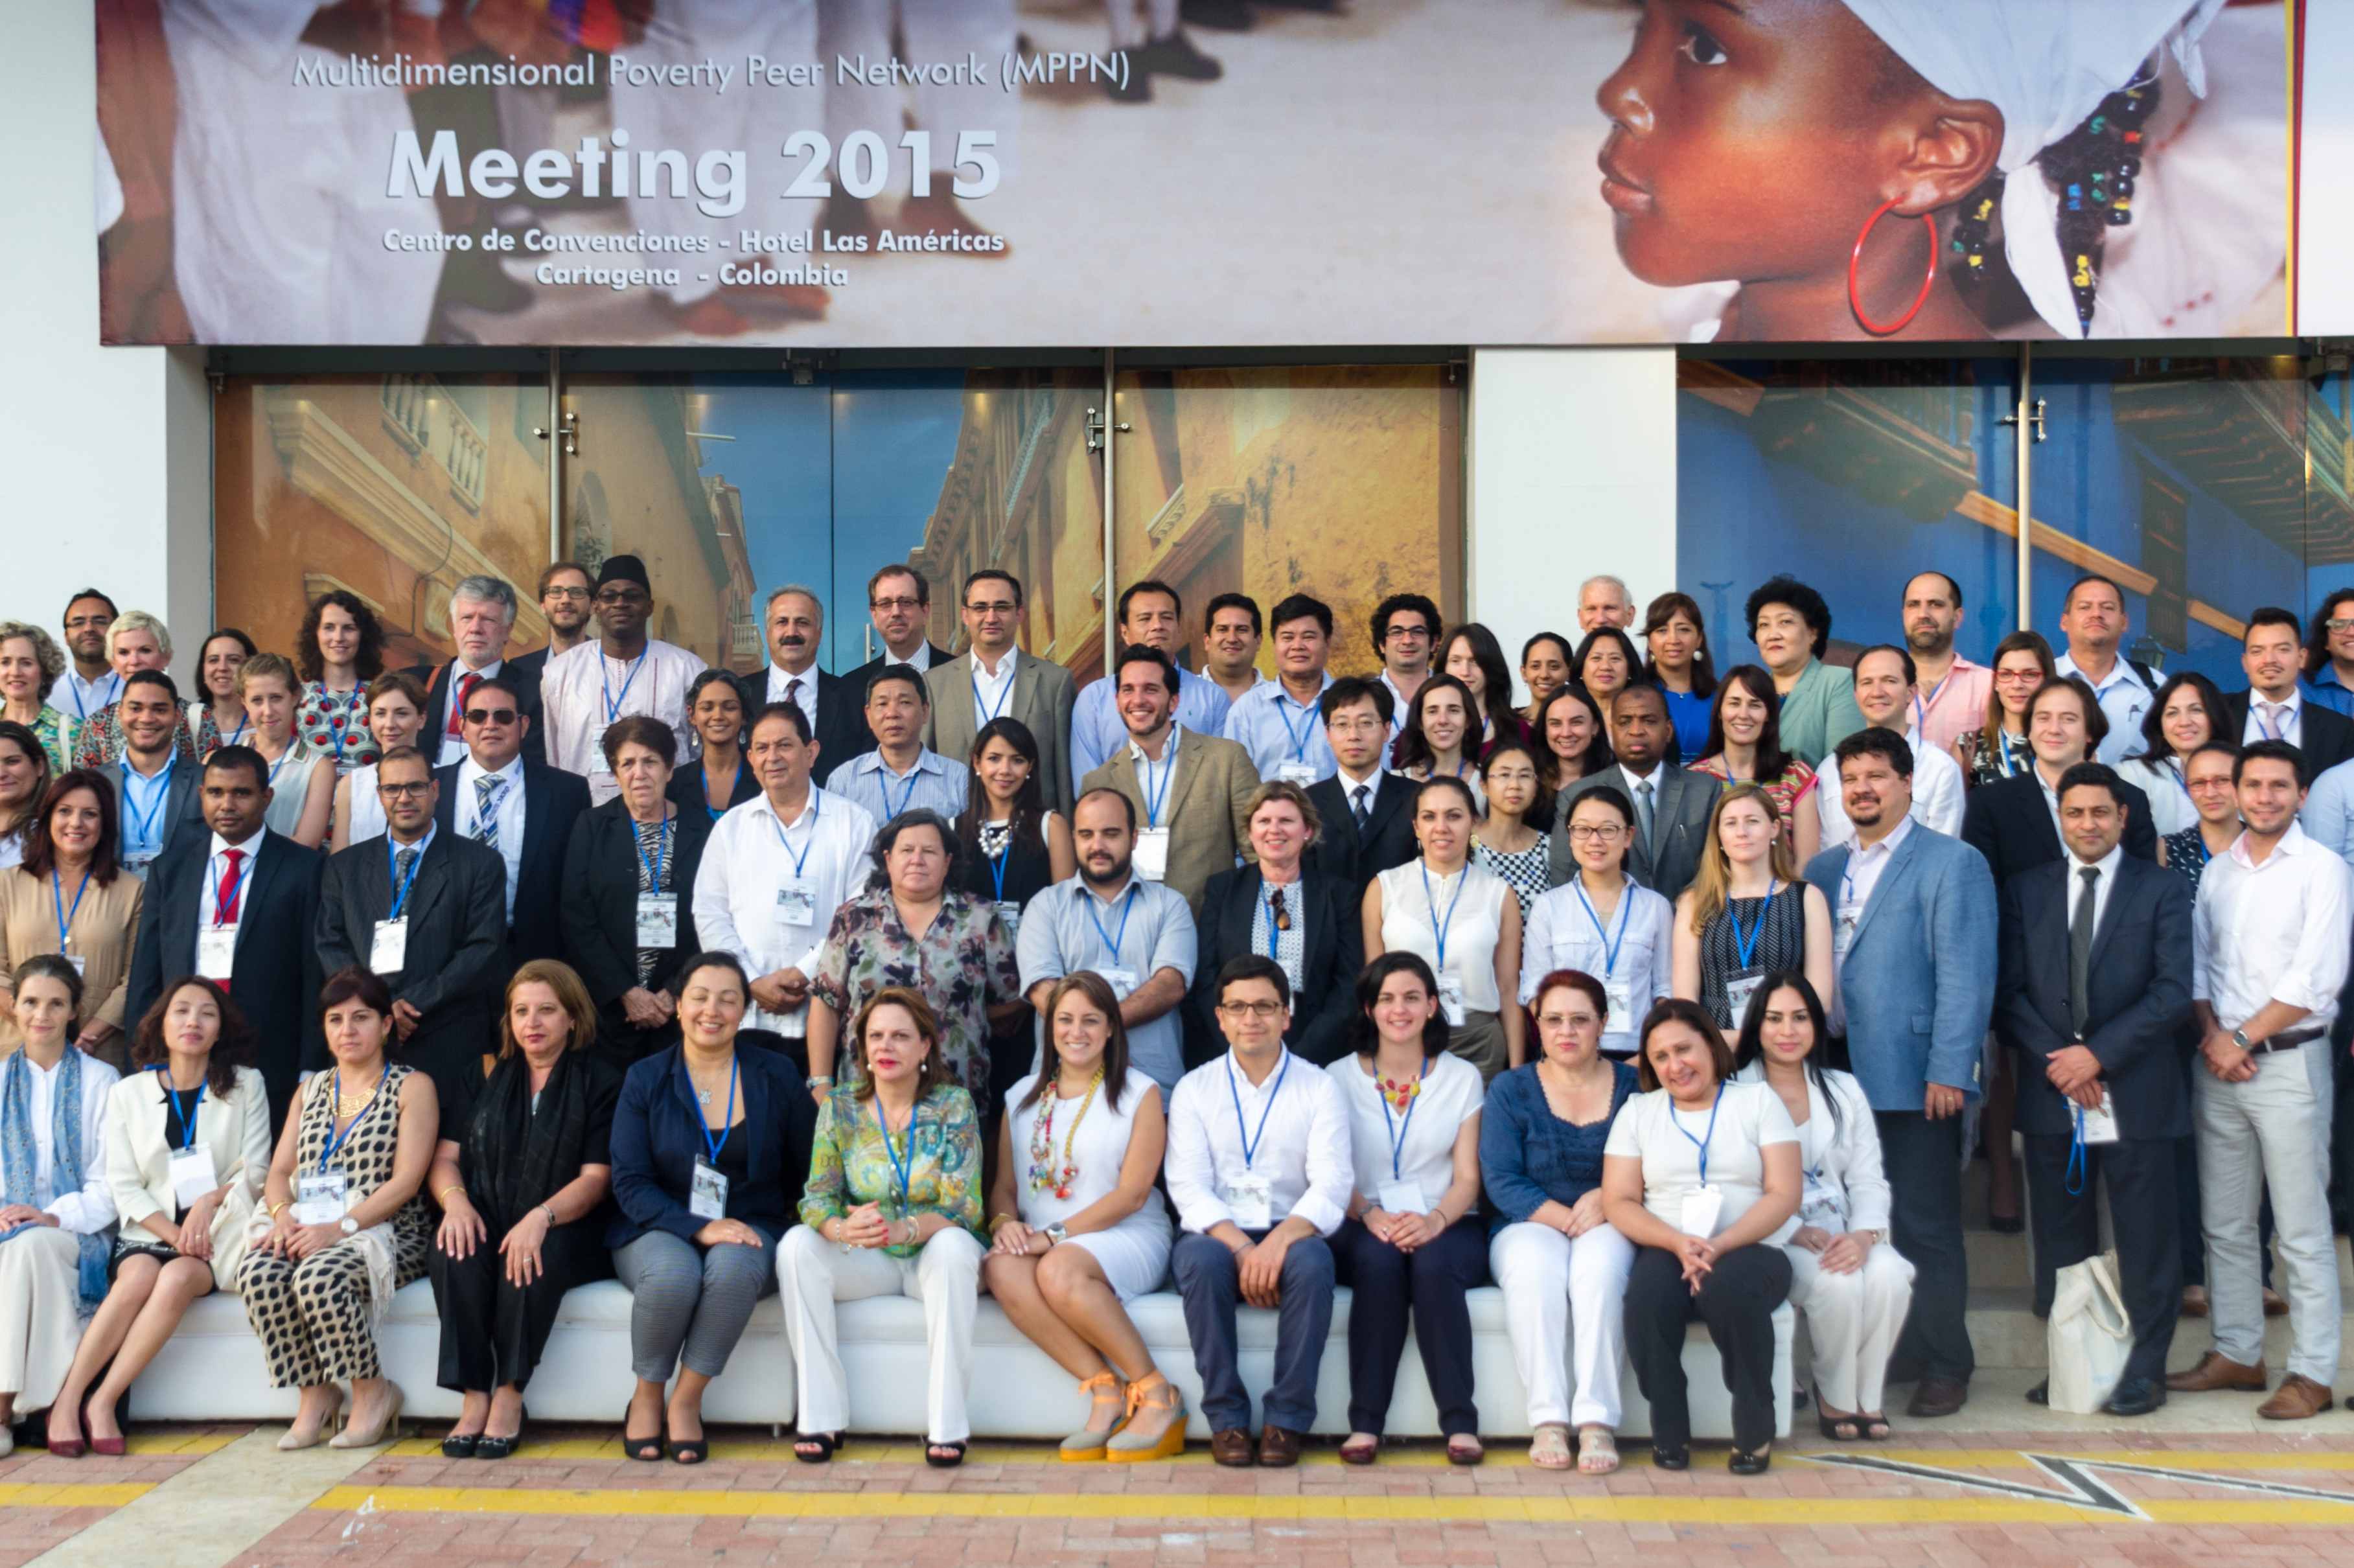 Group photo of MPPN Annual Meeting